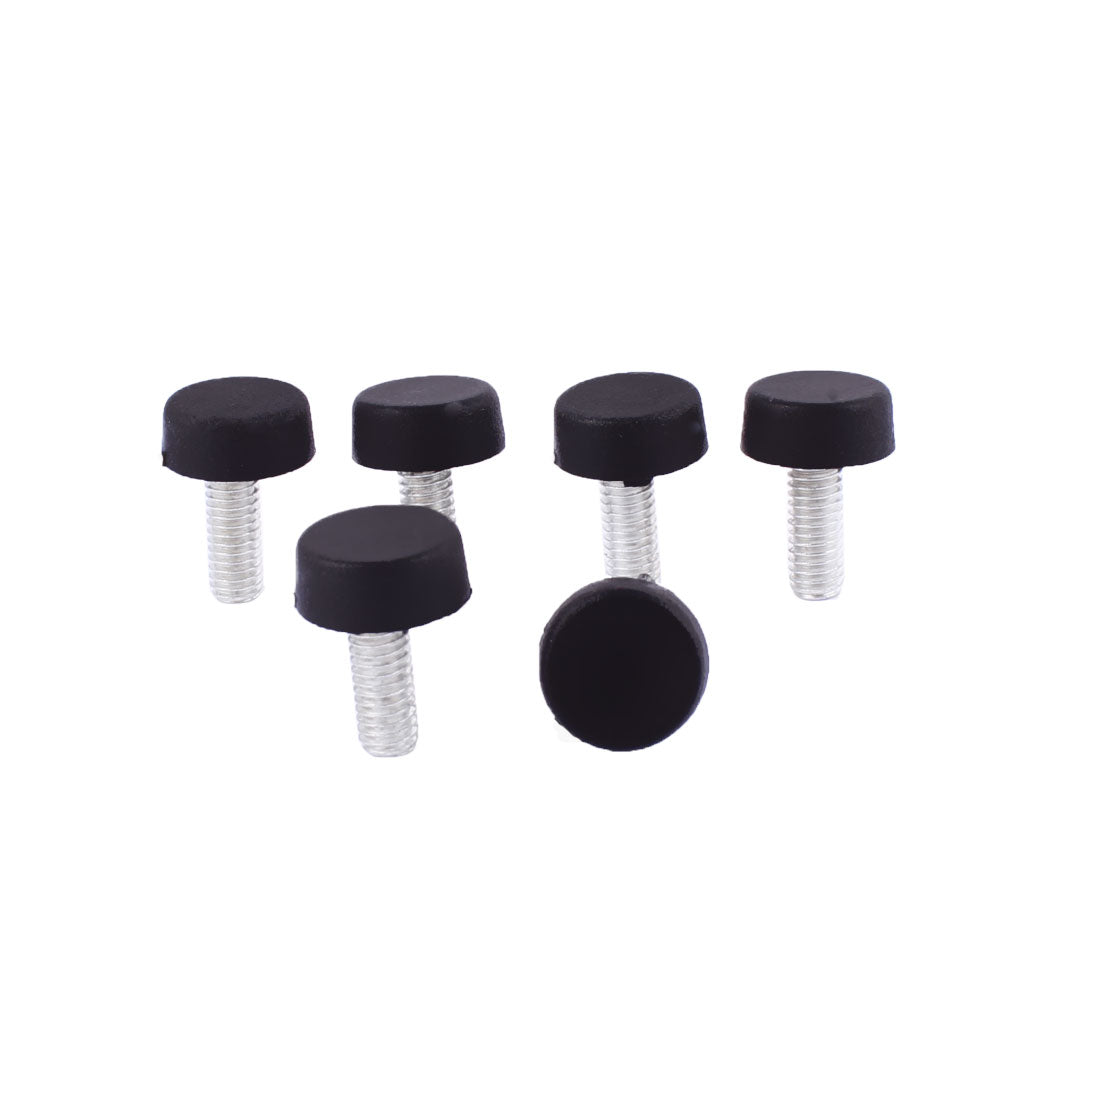 uxcell Uxcell 6mm Threaded Plastic Base Screw On Type Furniture Glide Leveling Foot Black 6pcs